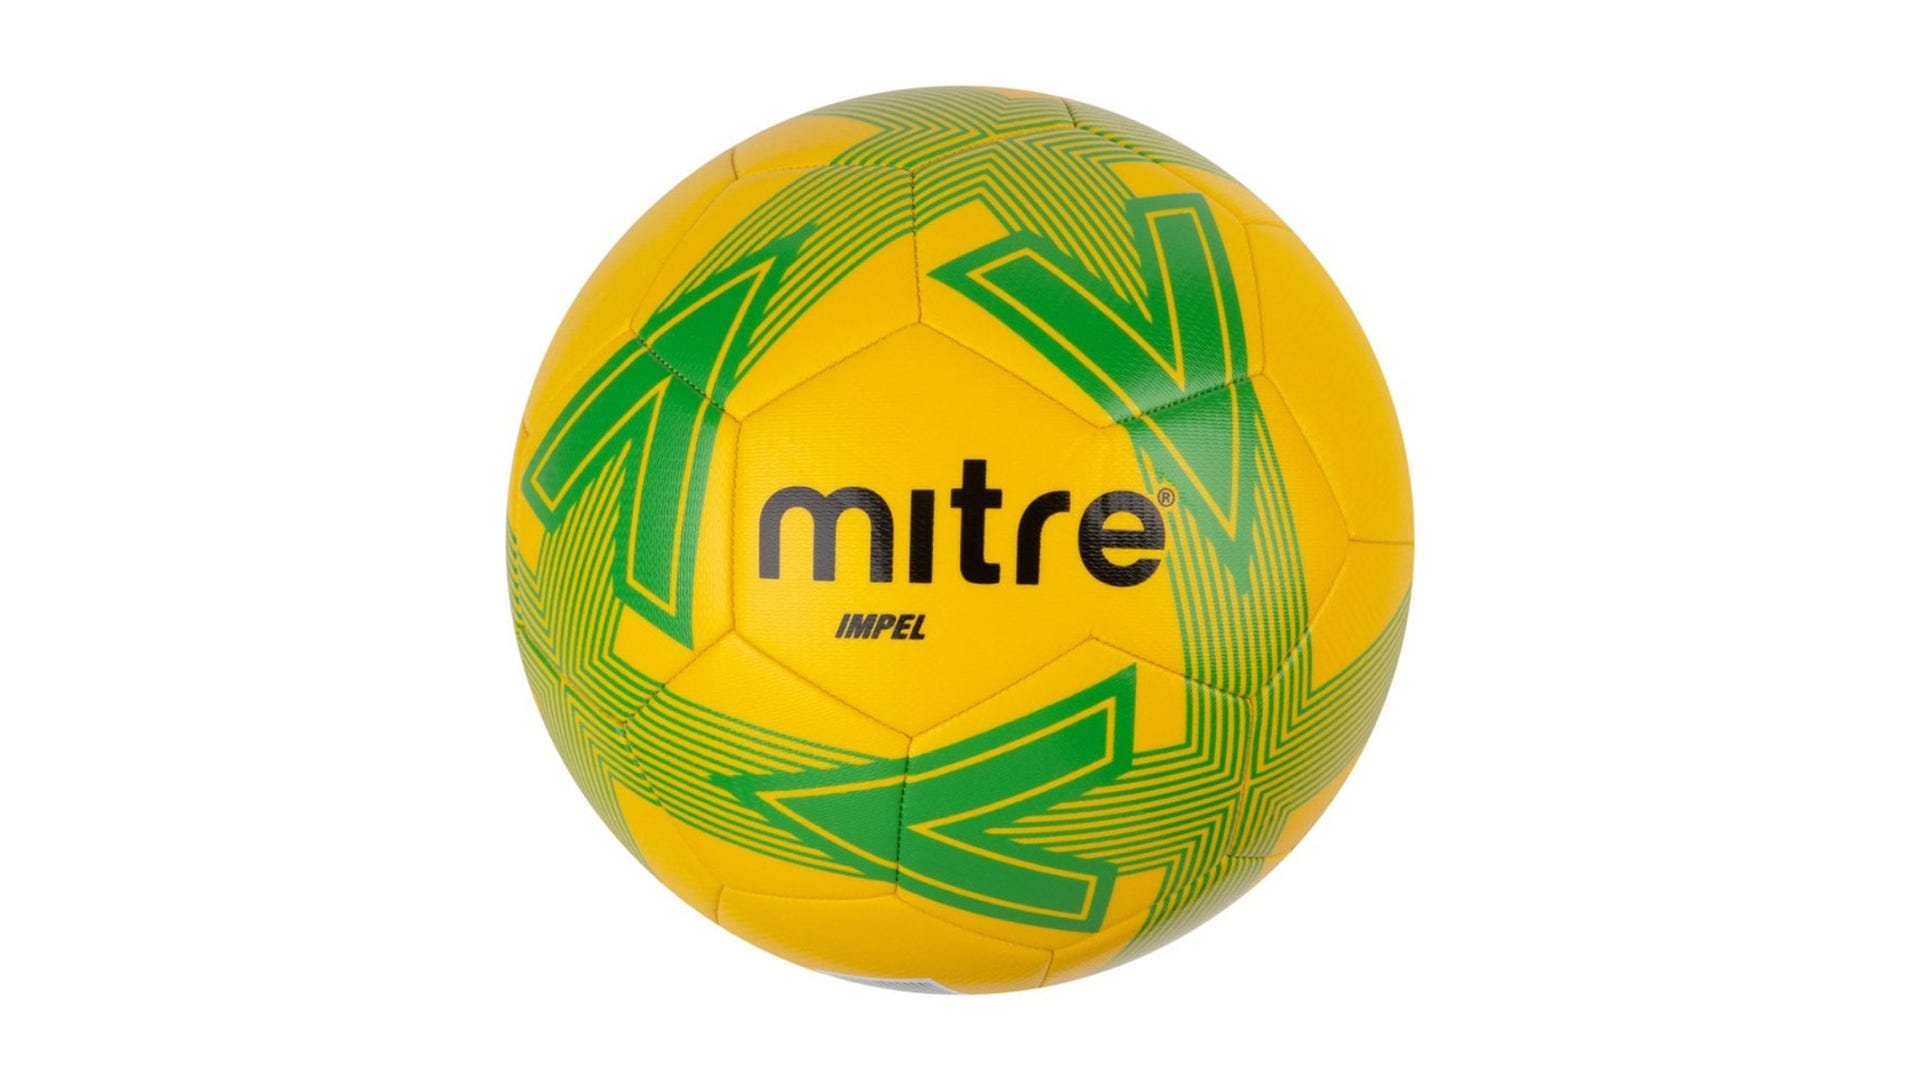 8.99 NEW Mitre IMPEL white or yellow Football Size 5  NEW for 2020 training ball 